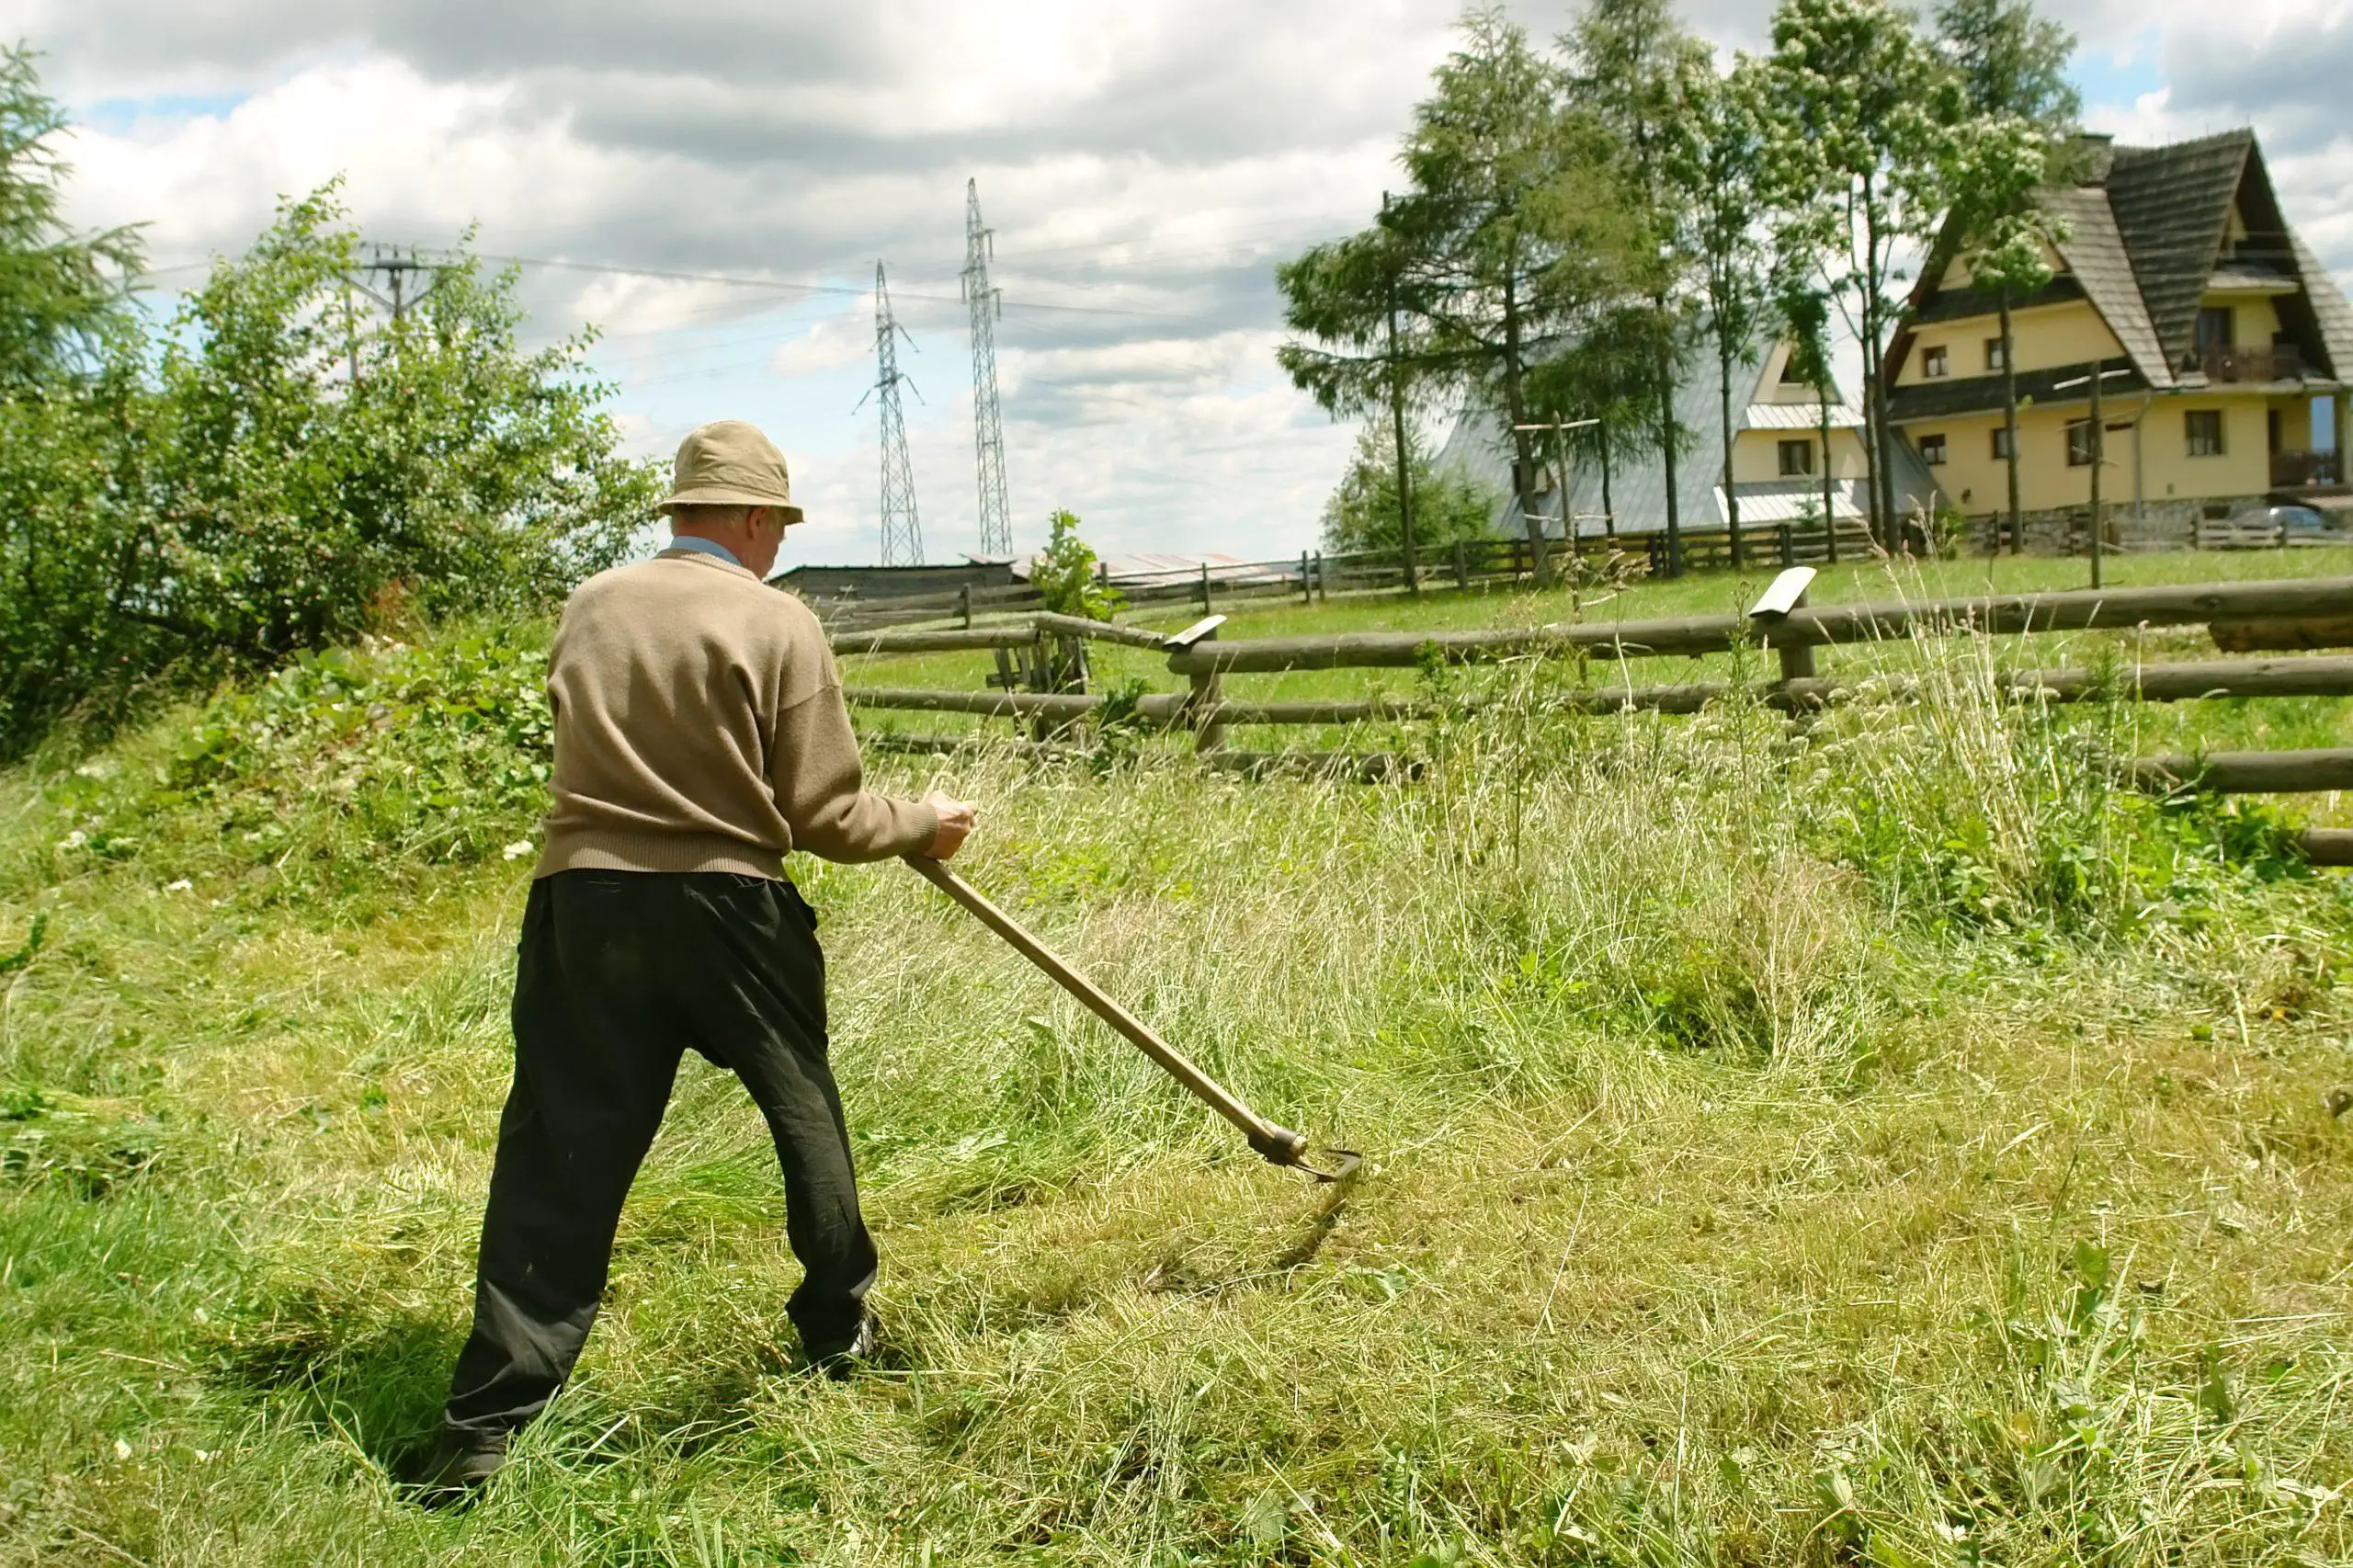 Use of a scythe to cut down invasive weeds